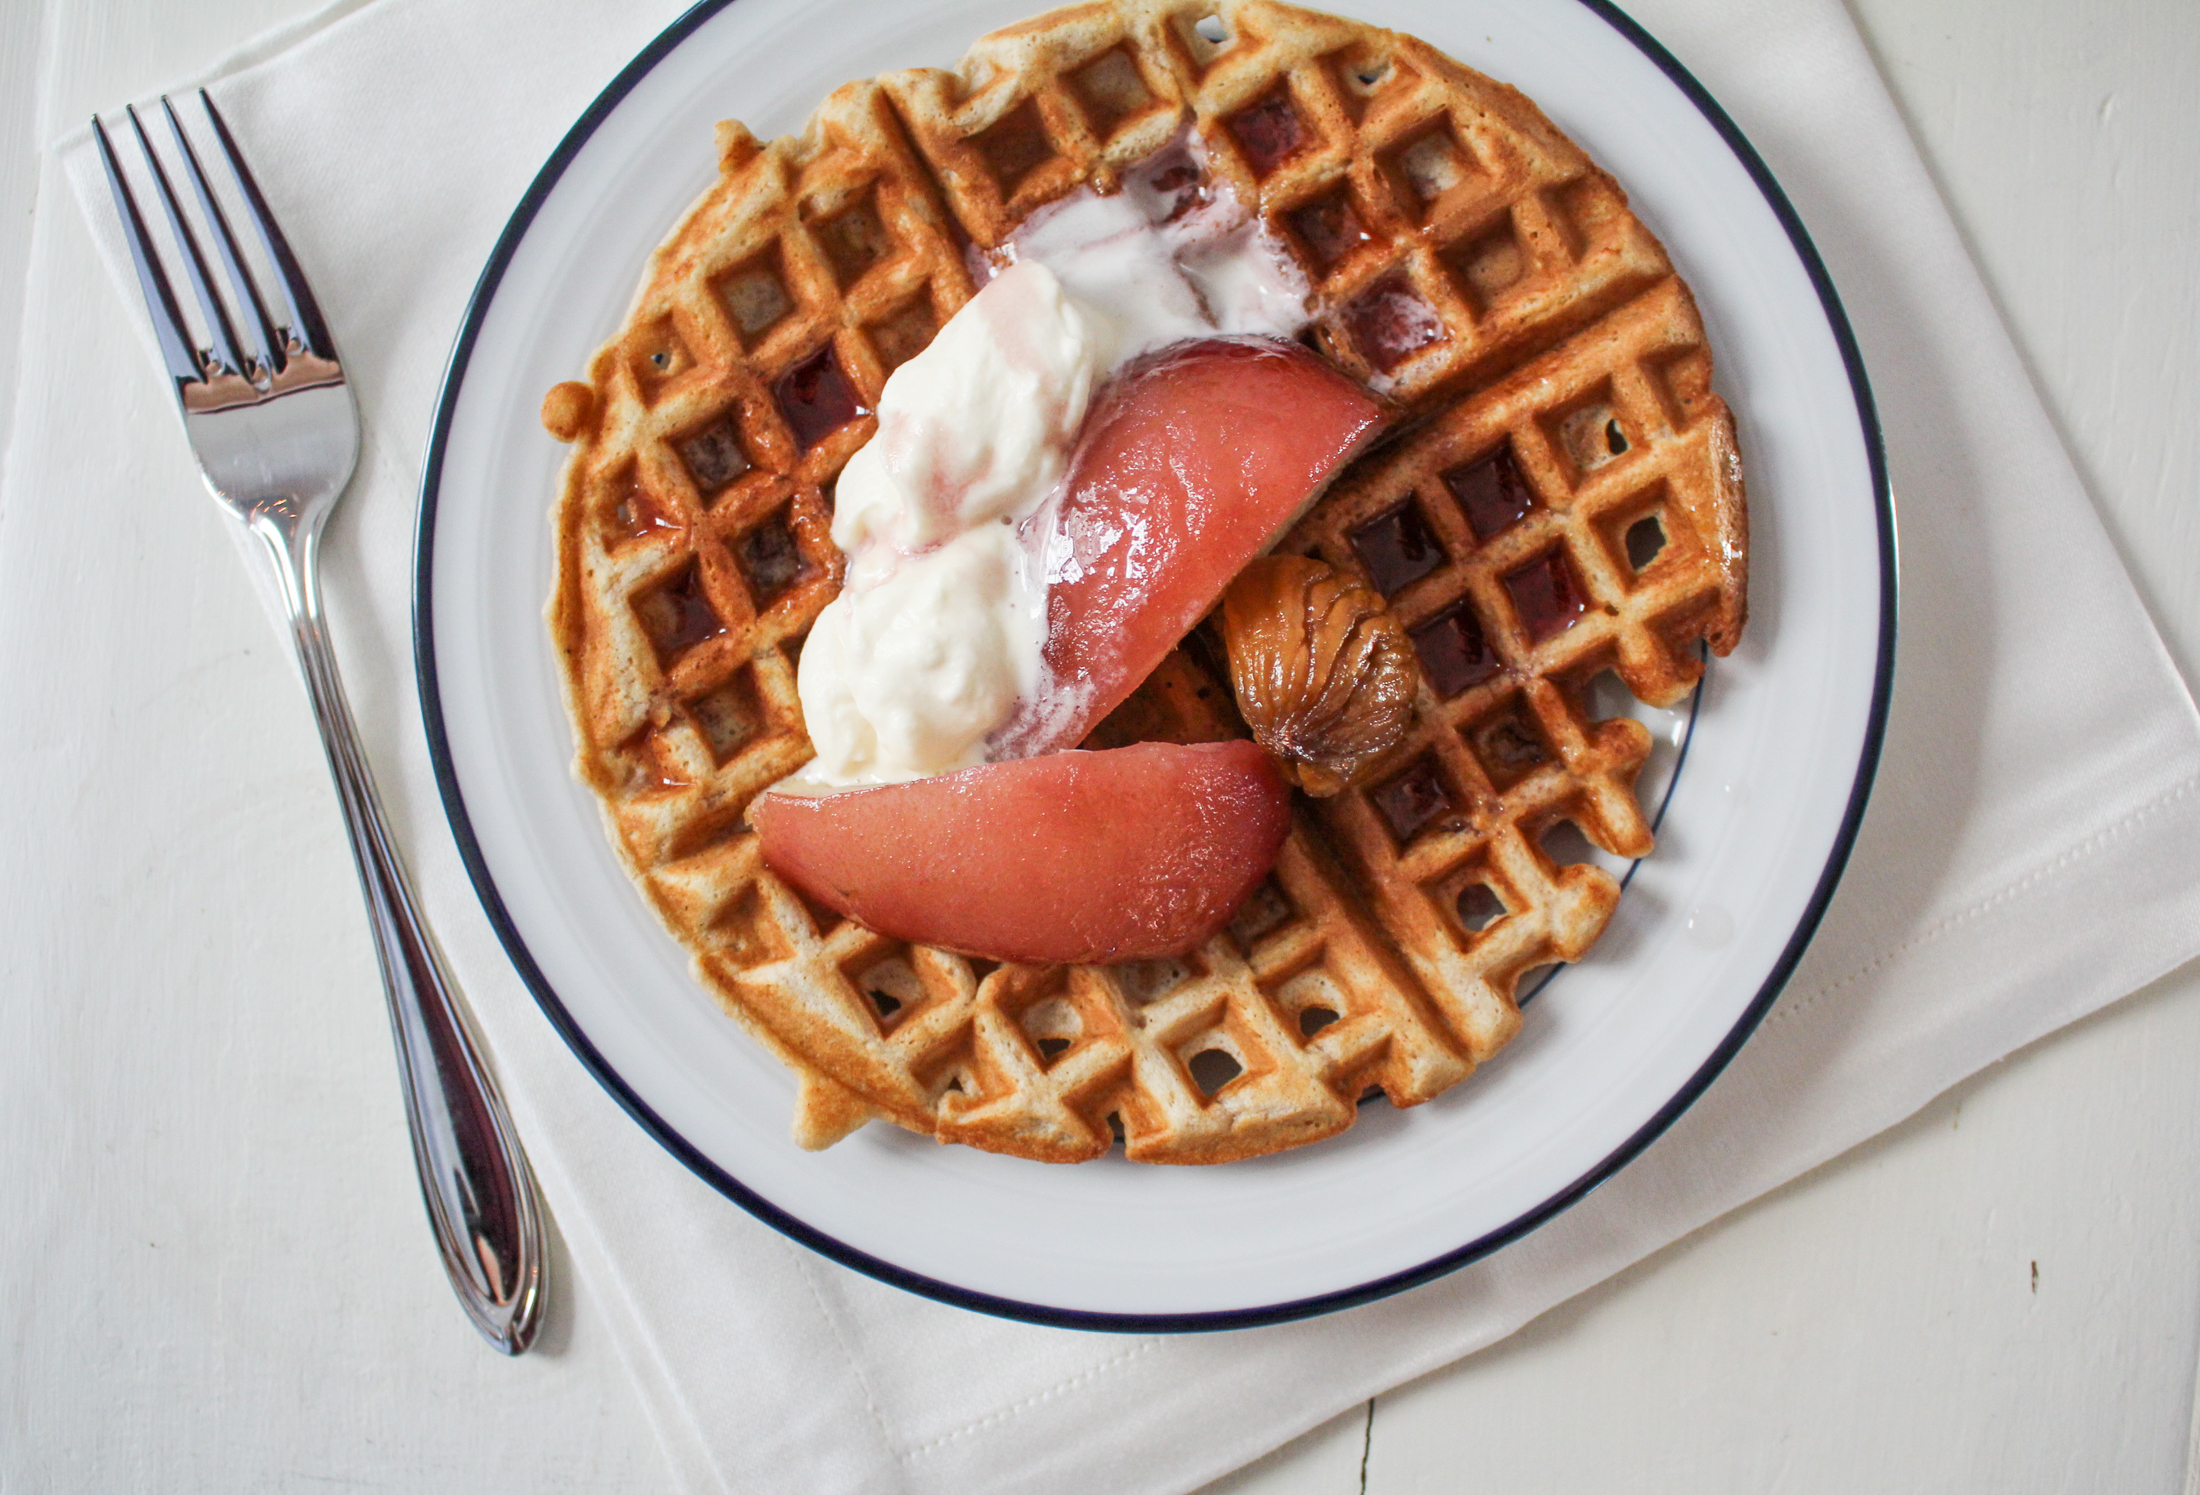 Brown-Butter Chestnut Waffles with Poached Pears and Whipped Mascarpone {Katie at the Kitchen Door}